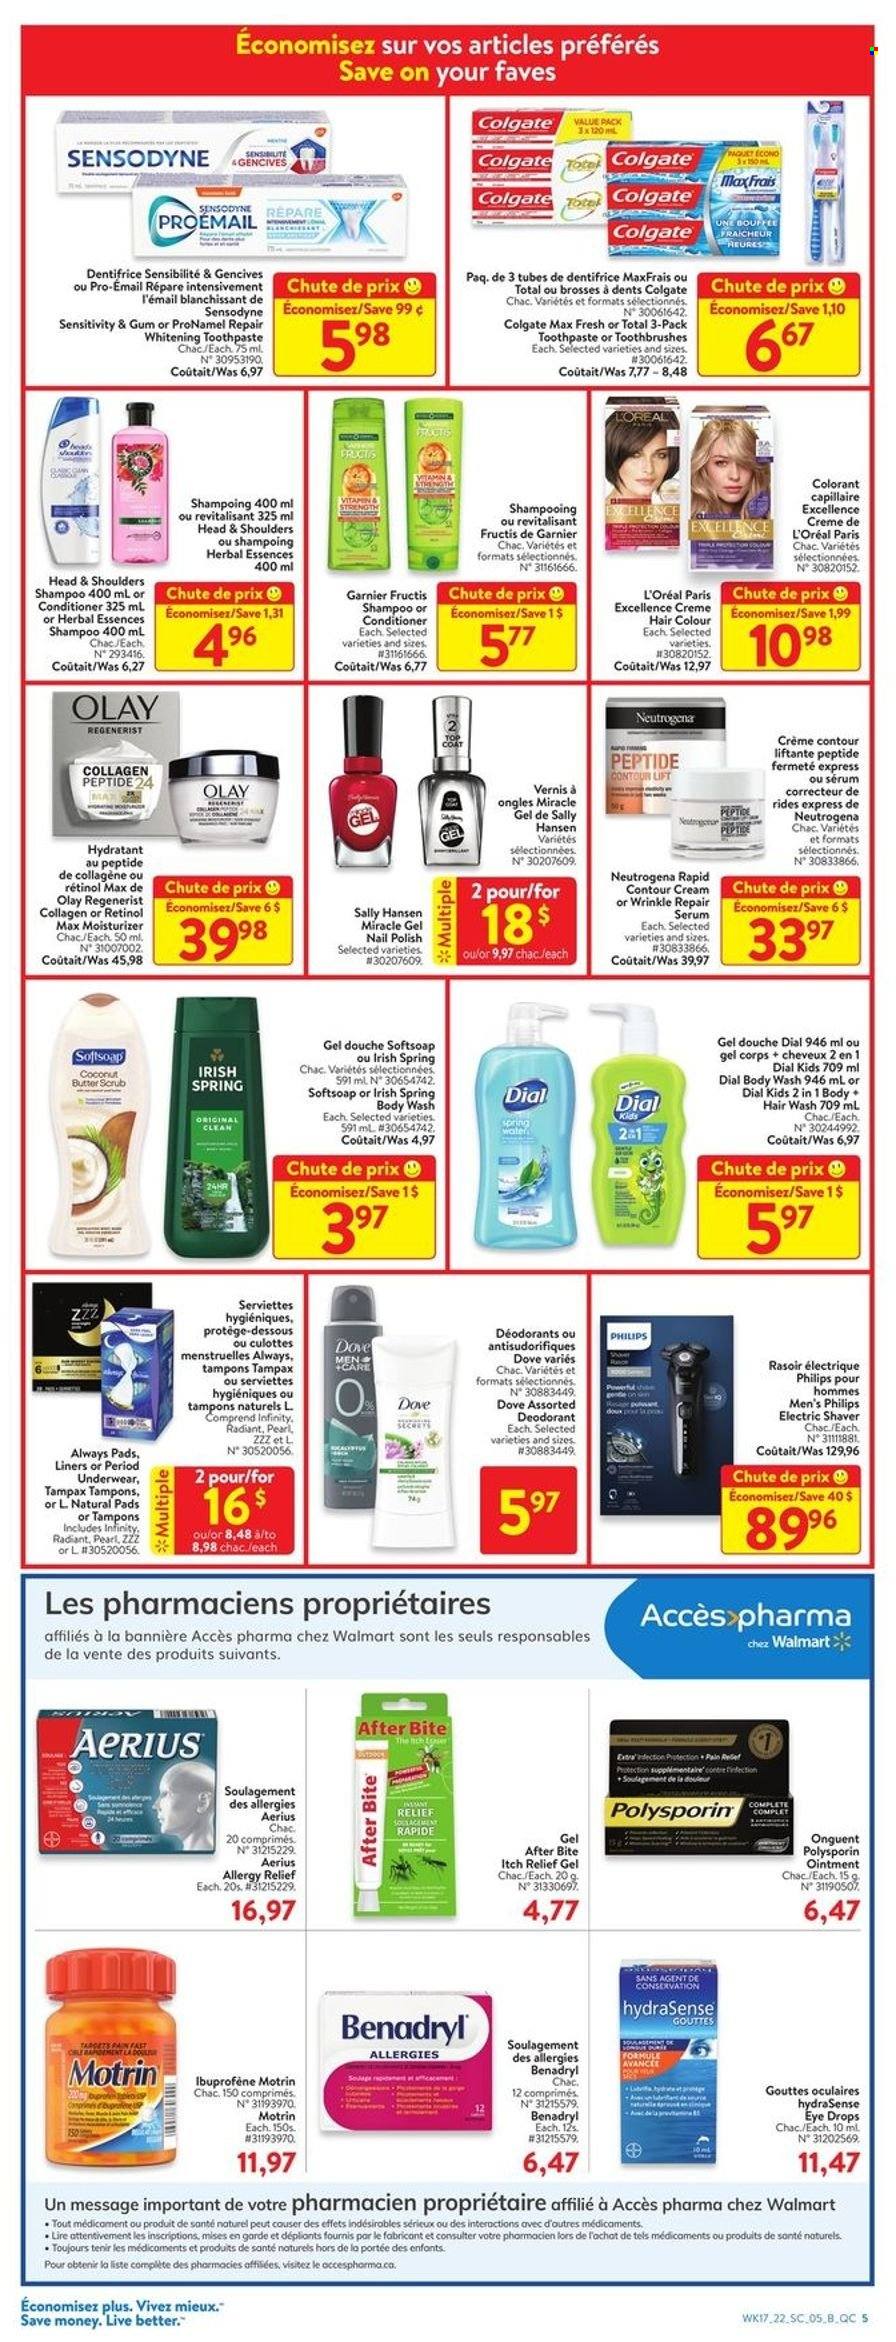 thumbnail - Walmart Flyer - May 19, 2022 - May 25, 2022 - Sales products - Philips, butter, ointment, body wash, Softsoap, Dial, toothpaste, Always pads, tampons, L’Oréal, moisturizer, serum, Olay, Infinity, conditioner, hair color, Herbal Essences, Fructis, anti-perspirant, shaver, polish, contour, eye drops, allergy relief, Motrin, Dove, Colgate, Garnier, Neutrogena, Sally Hansen, shampoo, Tampax, Head & Shoulders, Sensodyne, deodorant. Page 11.